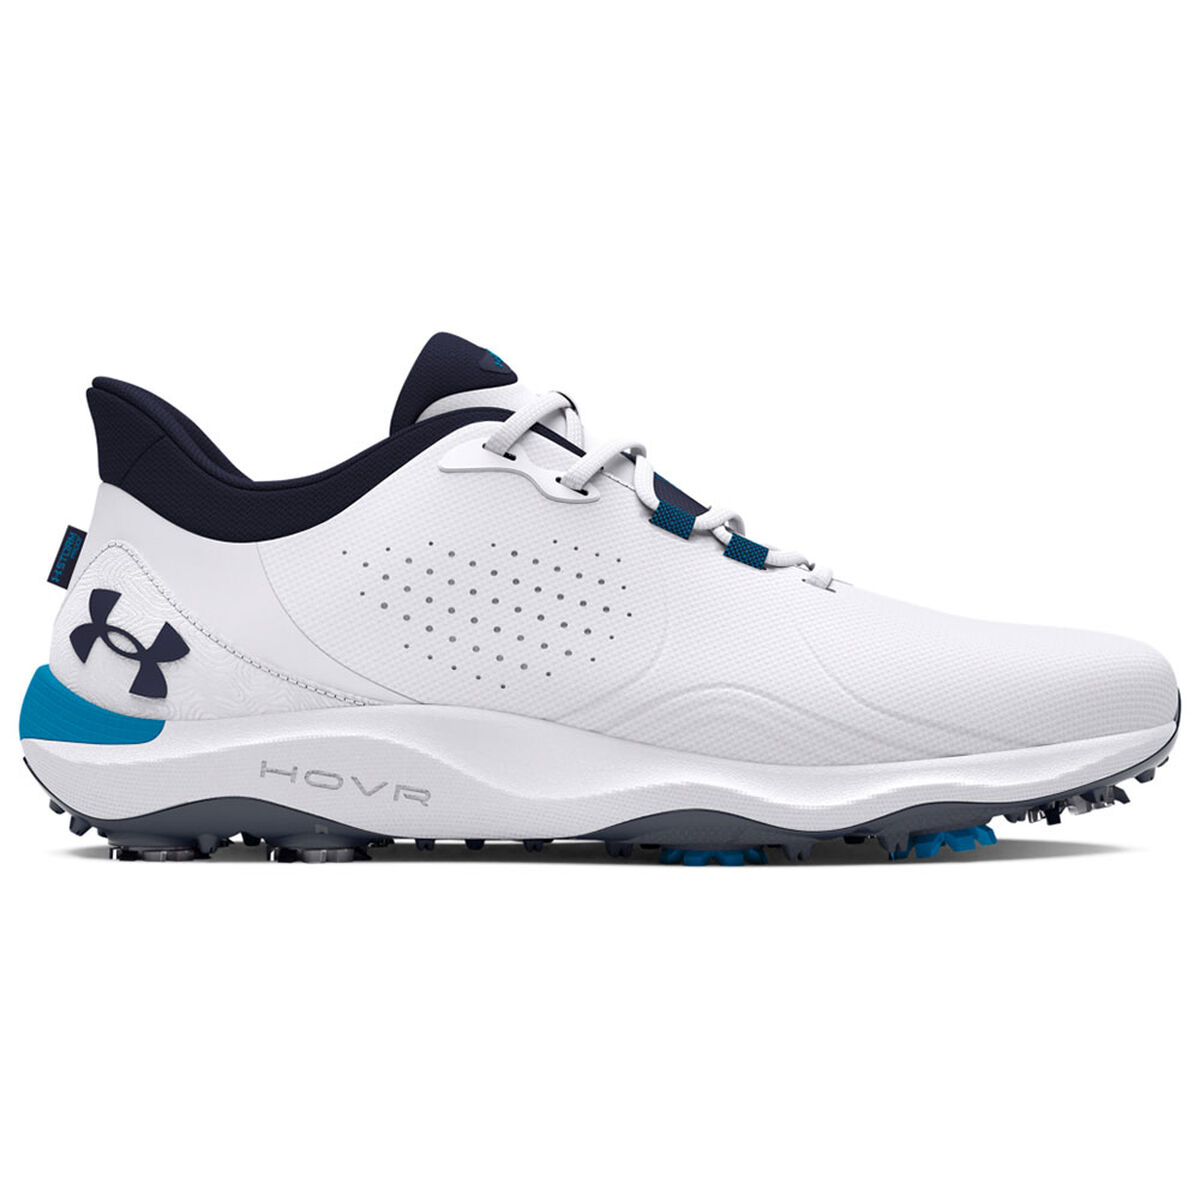 Under Armour Men’s Drive Pro Waterproof Spiked Golf Shoes, Mens, White/capri/midnight navy, 9 | American Golf